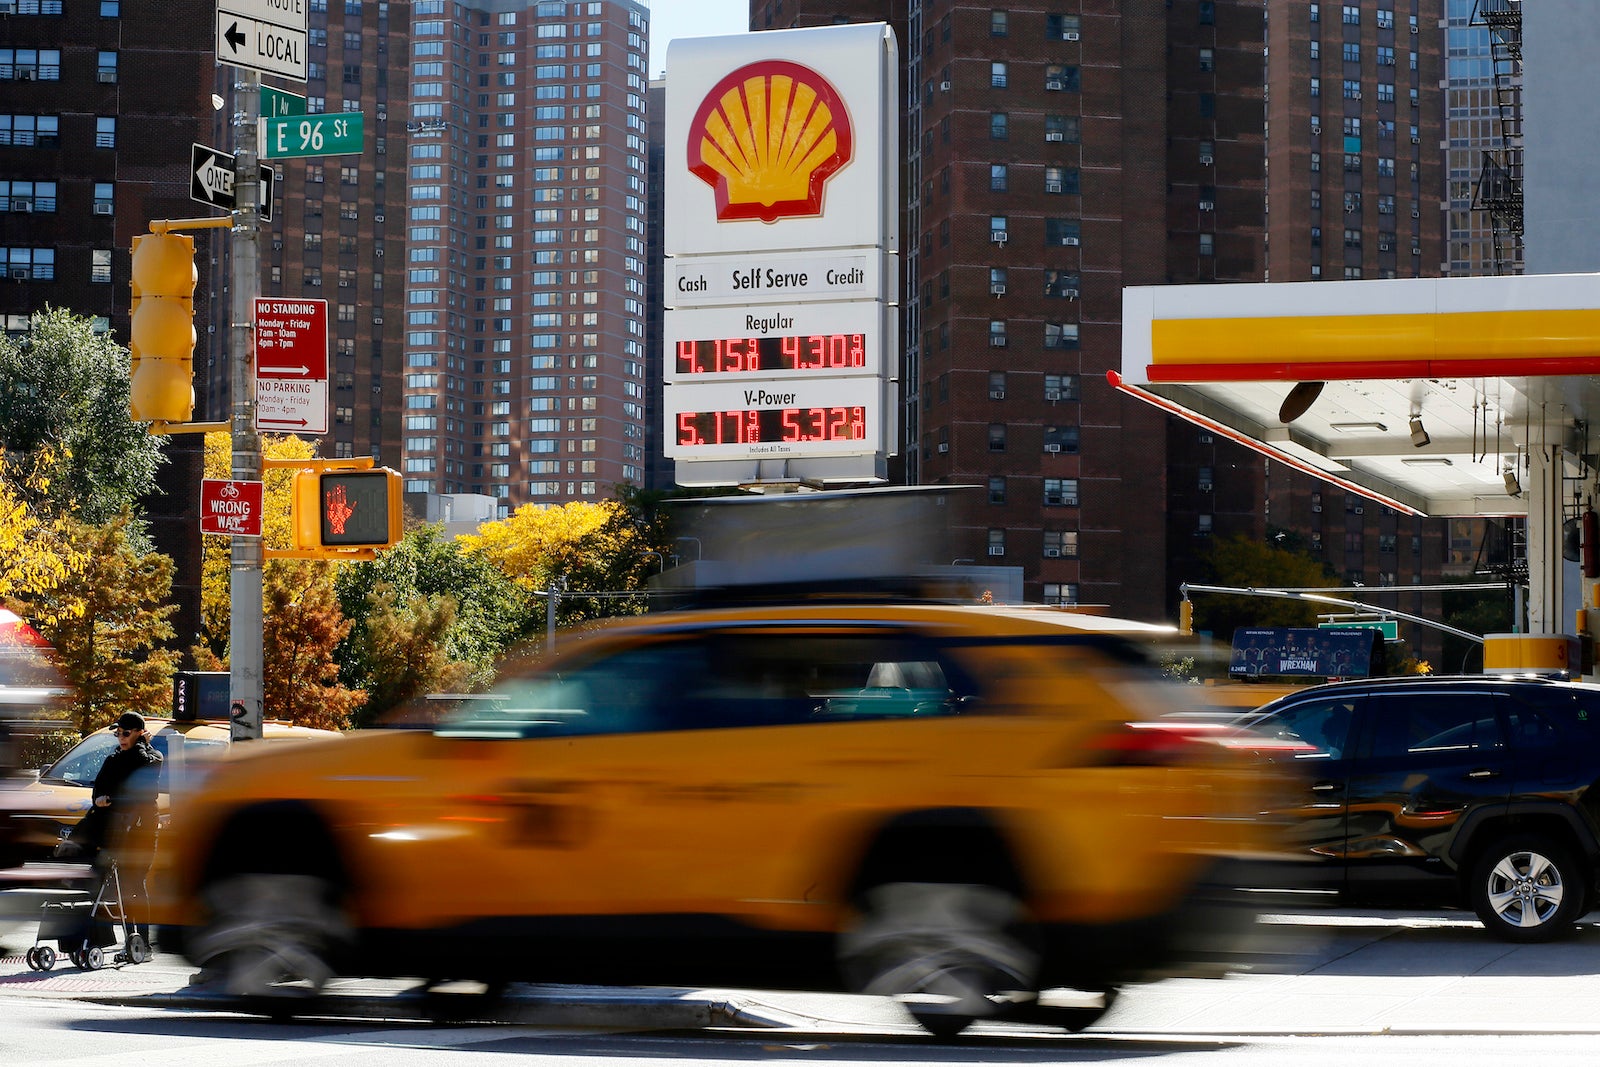 A taxi passes by a Shell gas station in New York City